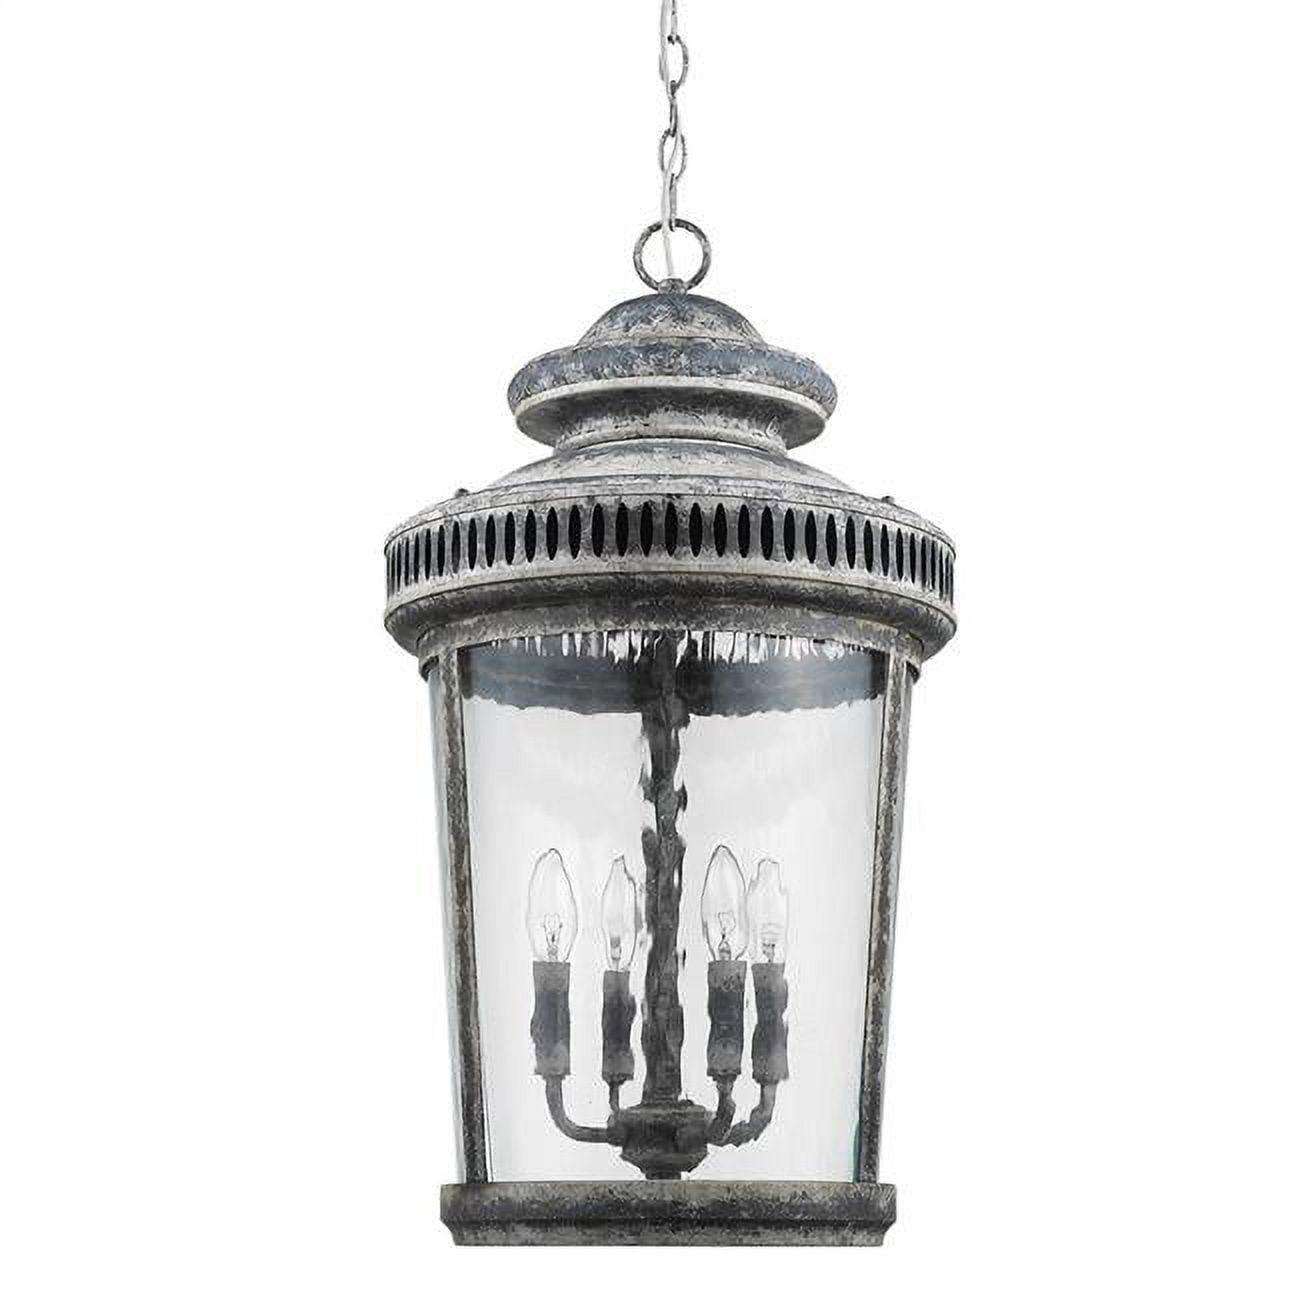 Kingston Antique Lead Classic Indoor/Outdoor Foyer Pendant with Curved Water Glass